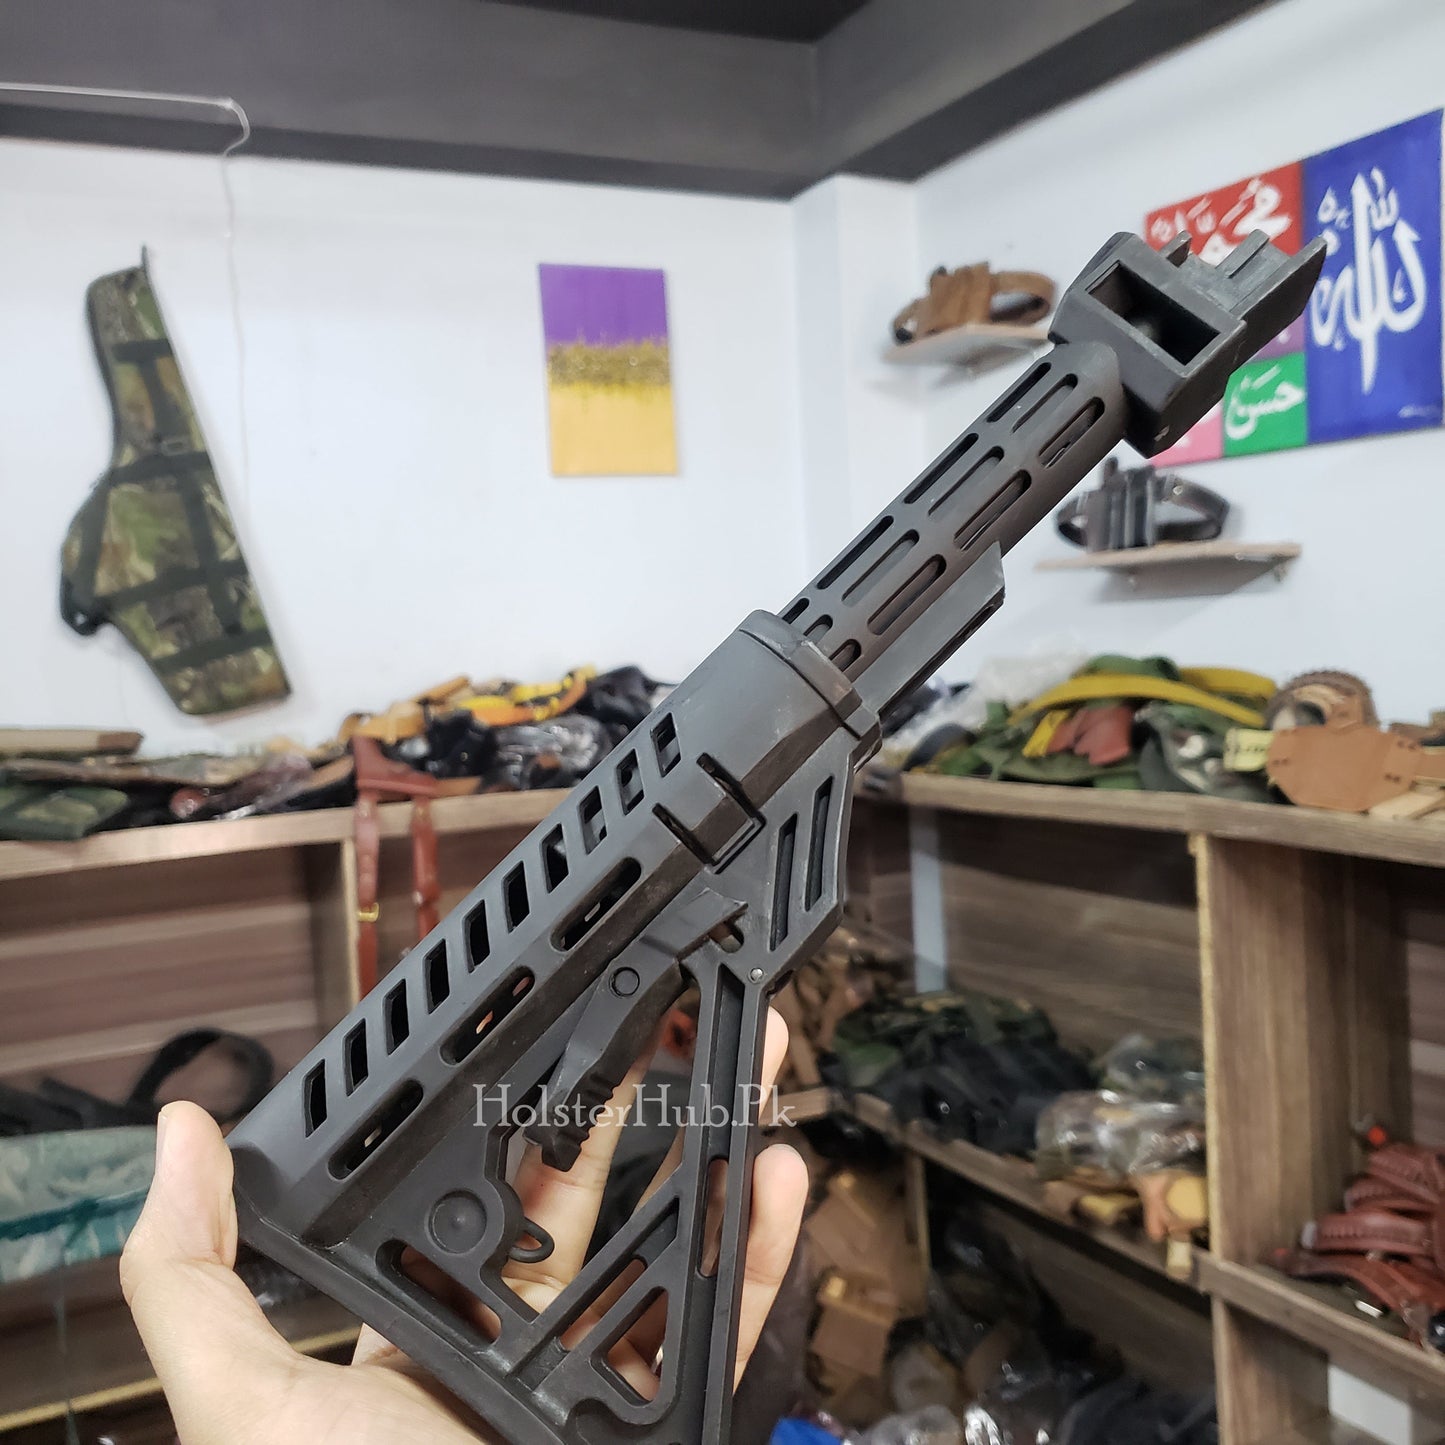 AK 47: Polymer Buttstock in Black - Easy Replacement for Wooden Stocks